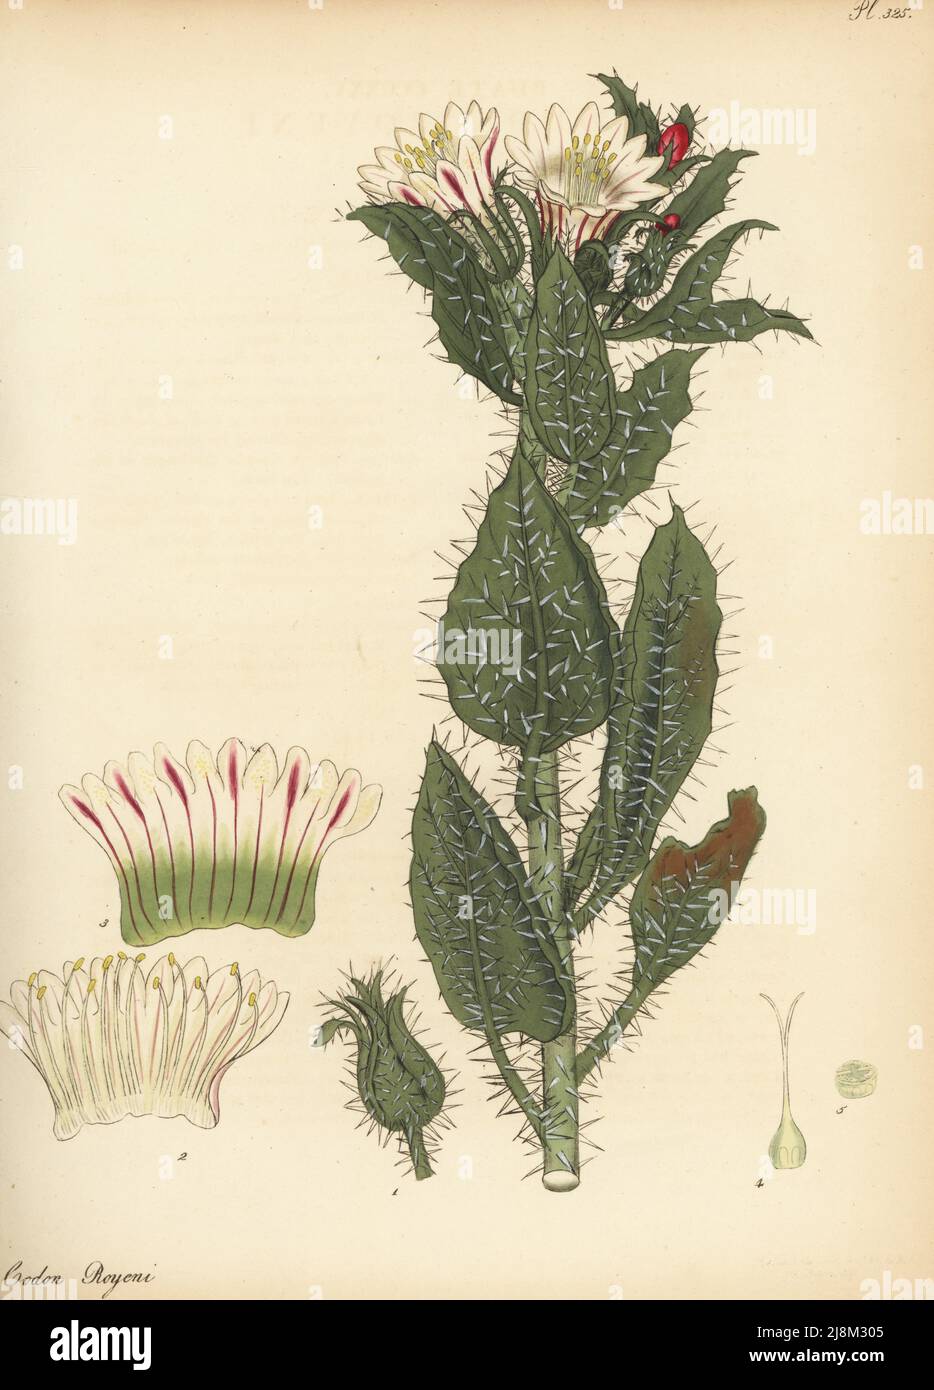 Honey bush or white nectarcup, Codon royenii. Prickly codon, Codon royeni. From the Cape of Good Hope, South Africa, Namibia, in Lee and Kennedy's Hammersmith Nursery. Copperplate engraving drawn, engraved and hand-coloured by Henry Andrews from his Botanical Register, Volume 5, self-published in Knightsbridge, London, 1803. Stock Photo